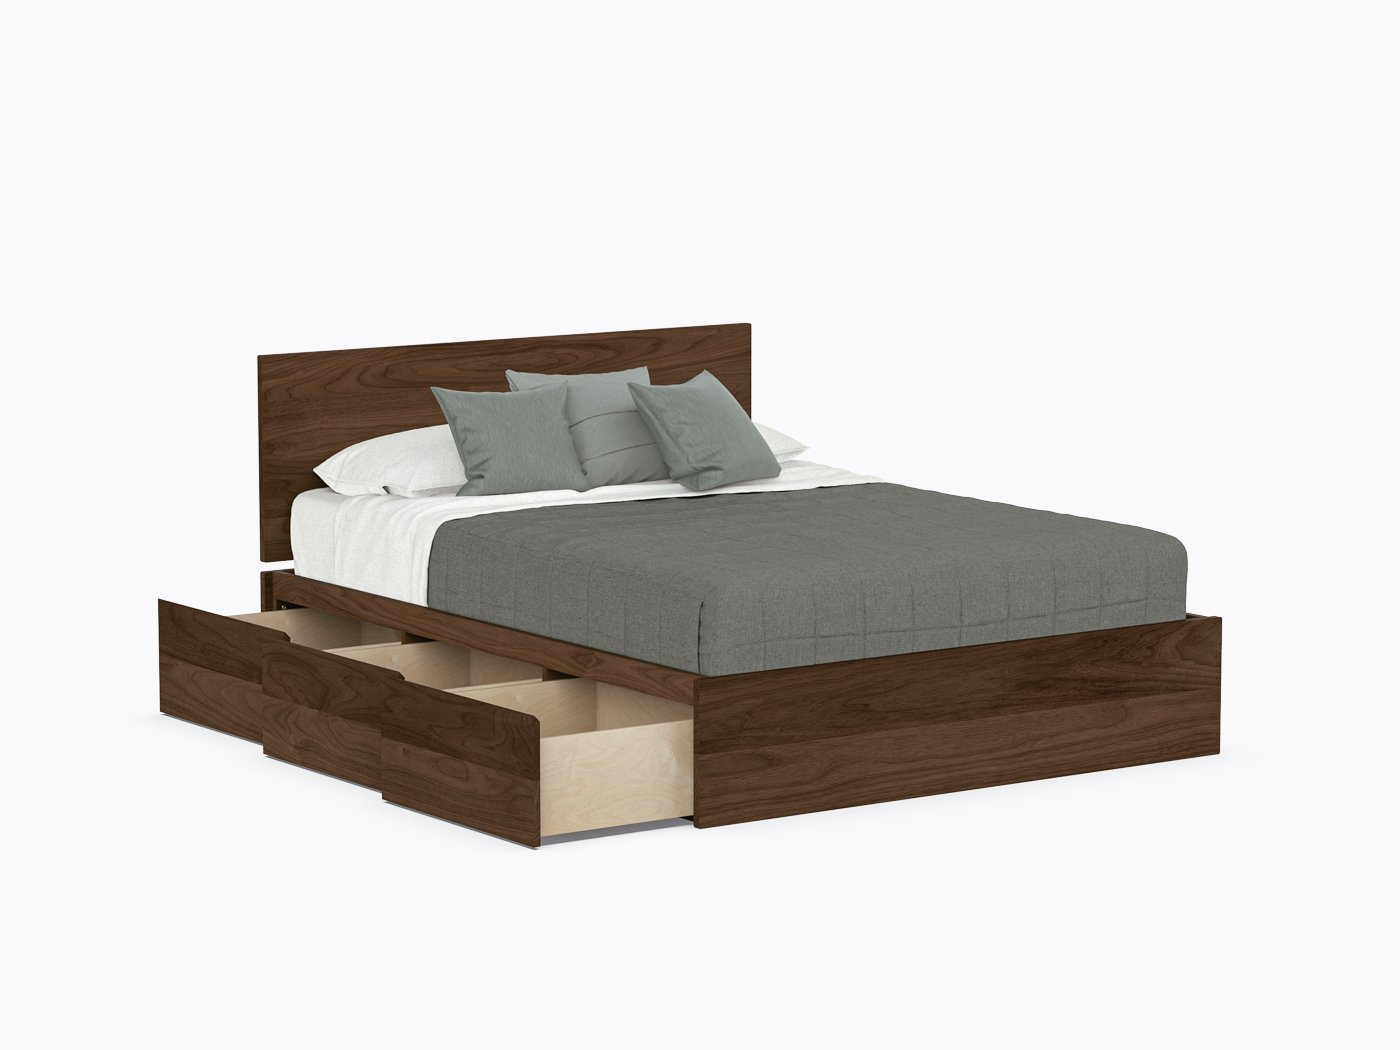 Baxter Bed with drawers - Queen with headboard - Walnut